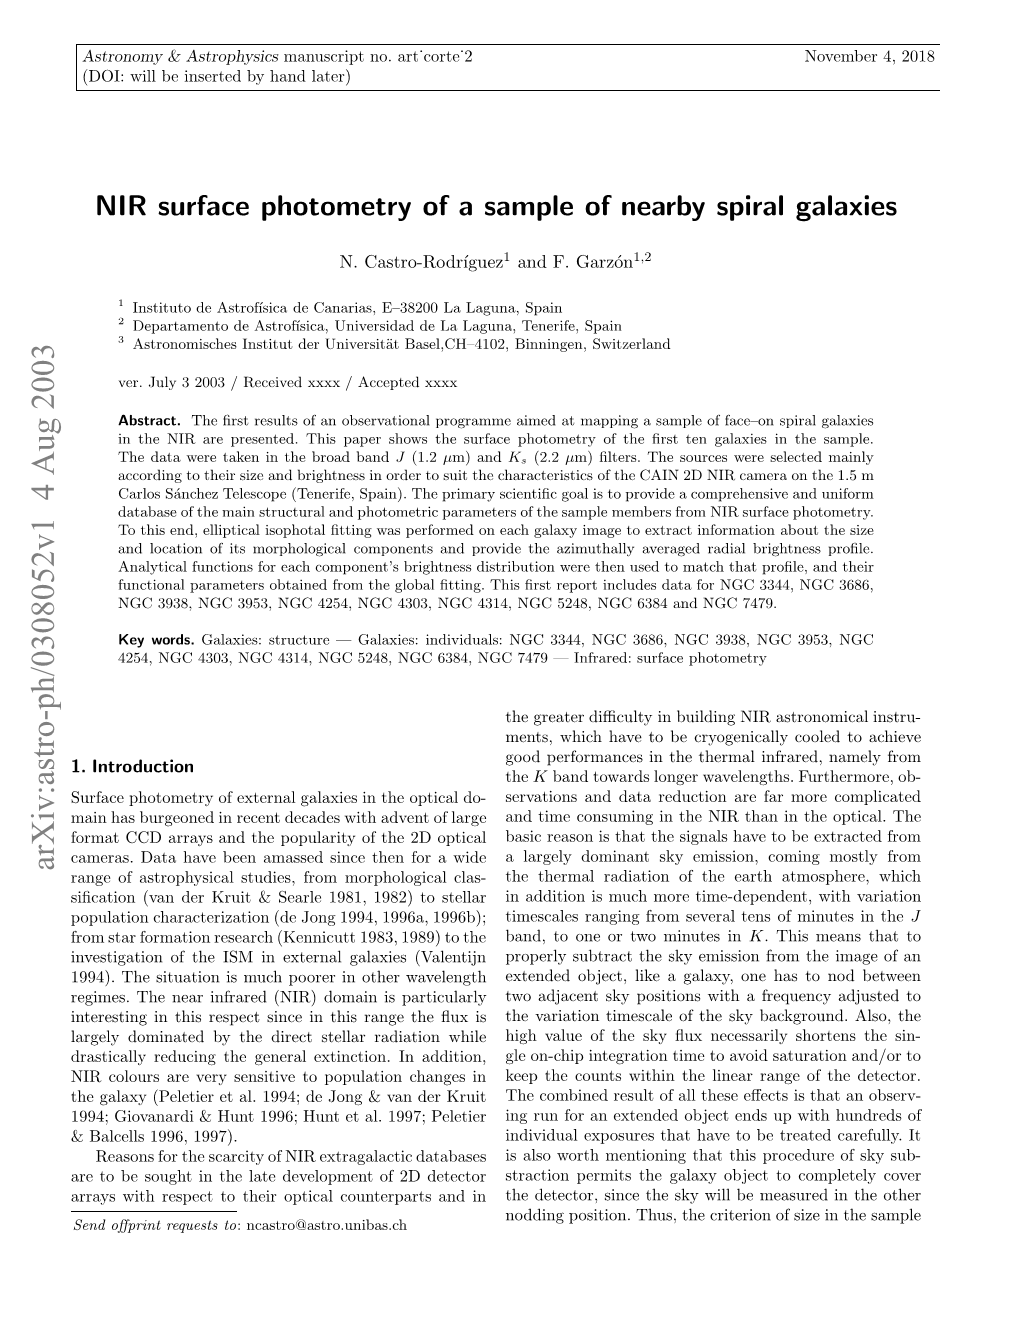 NIR Surface Photometry of a Sample of Nearby Spiral Galaxies